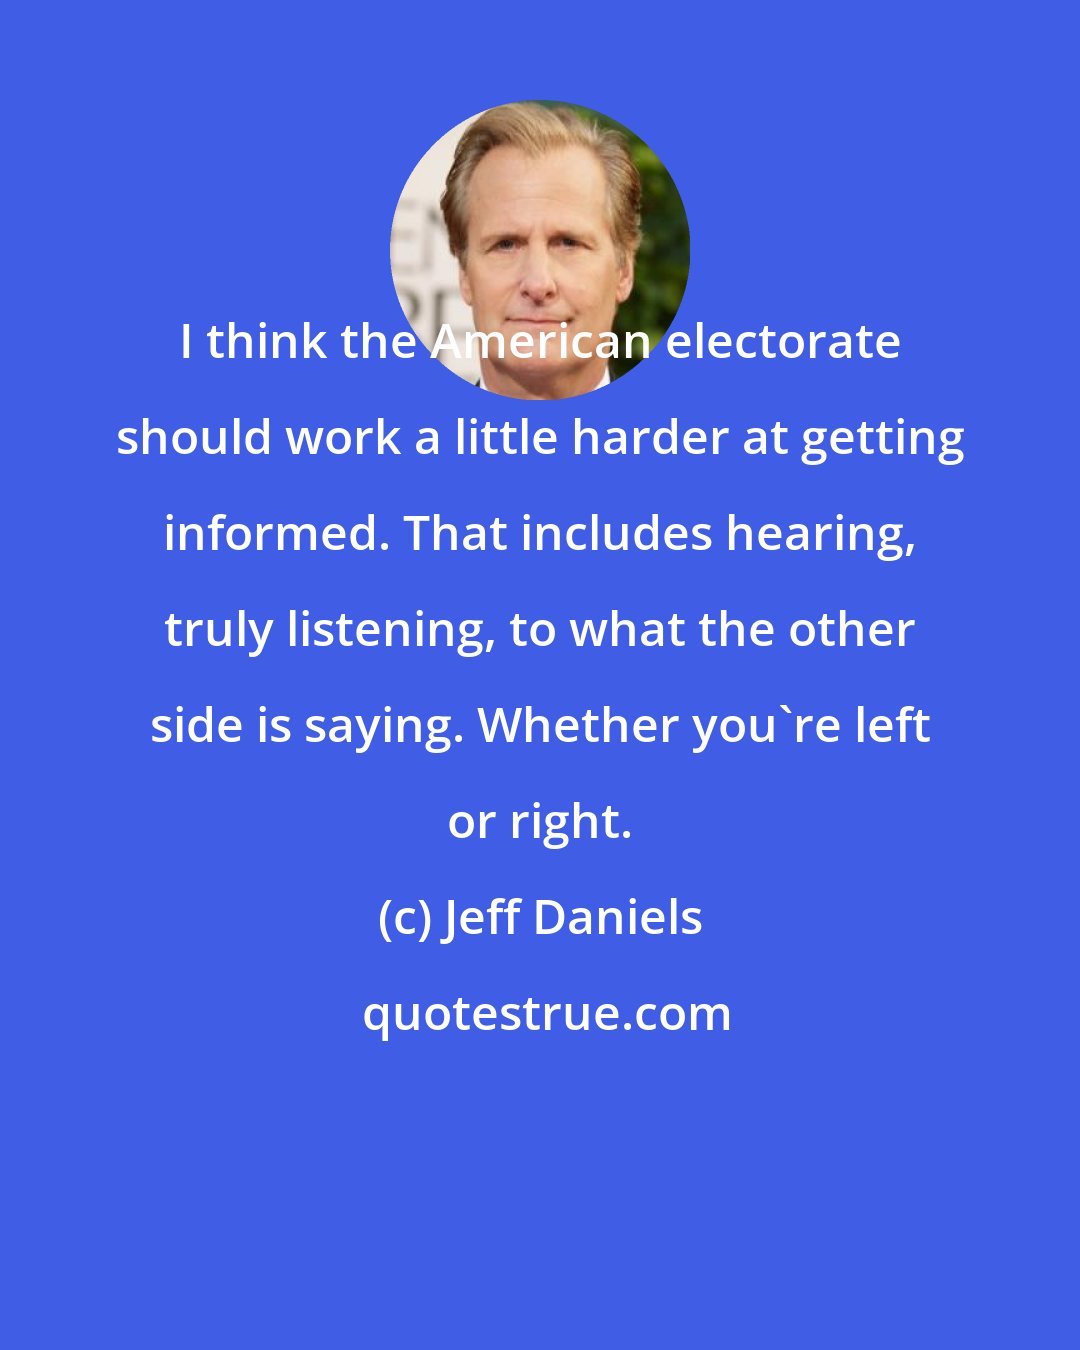 Jeff Daniels: I think the American electorate should work a little harder at getting informed. That includes hearing, truly listening, to what the other side is saying. Whether you're left or right.